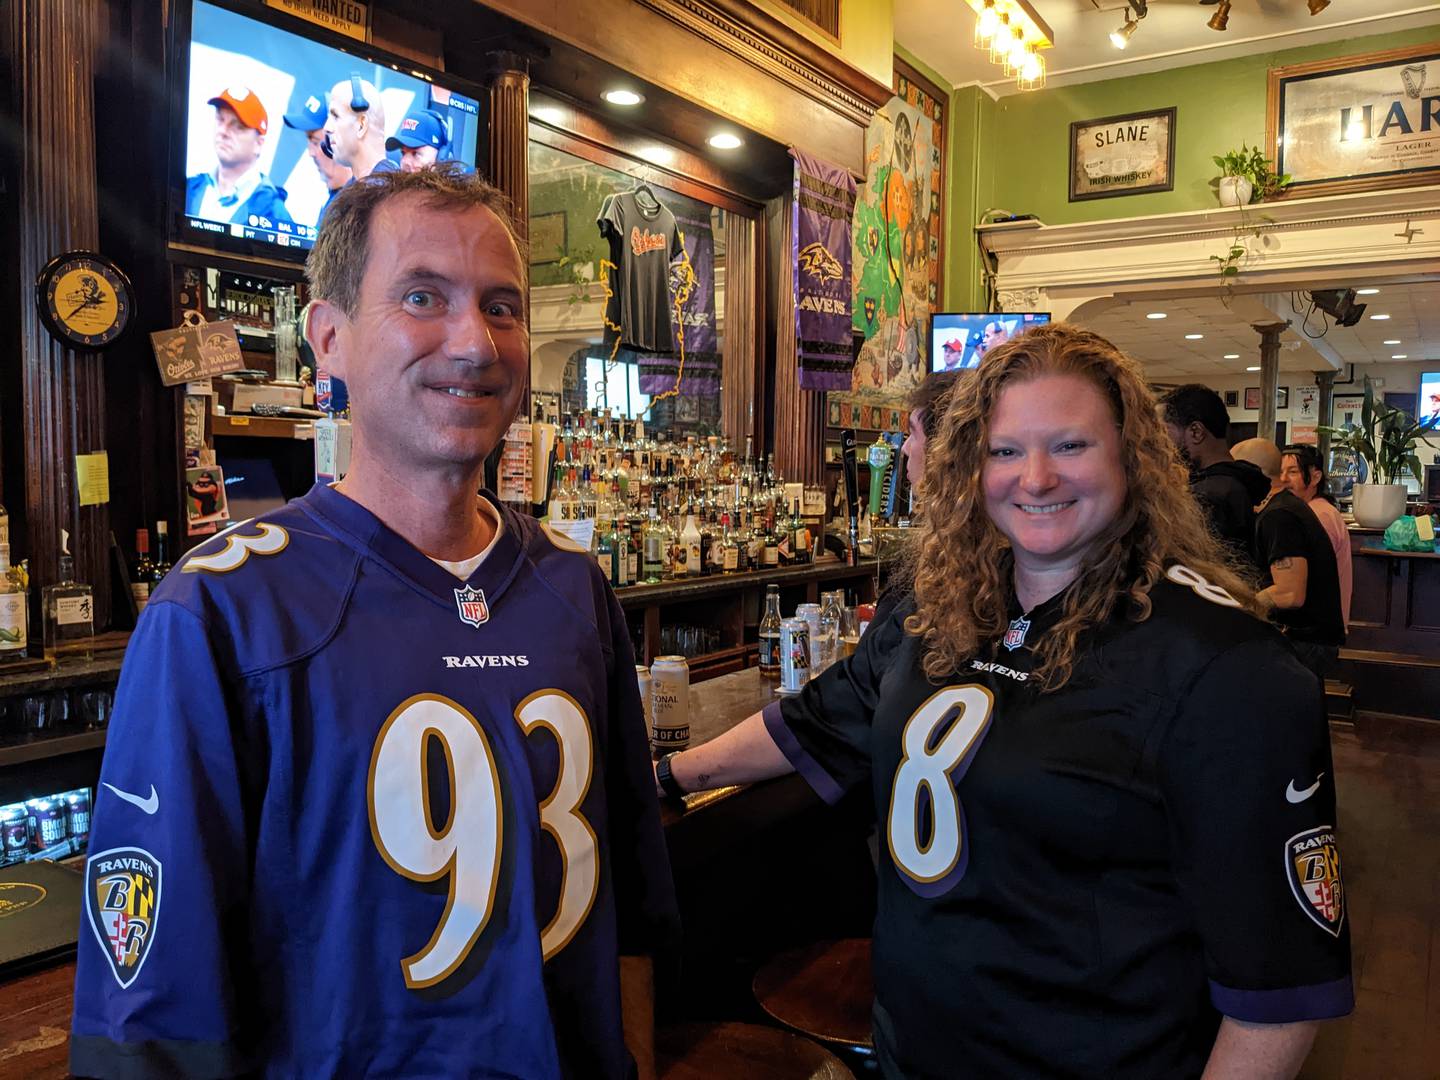 A man and a woman, both wearing purple Ravens jerseys, stand in front of a bar playing football on the television.